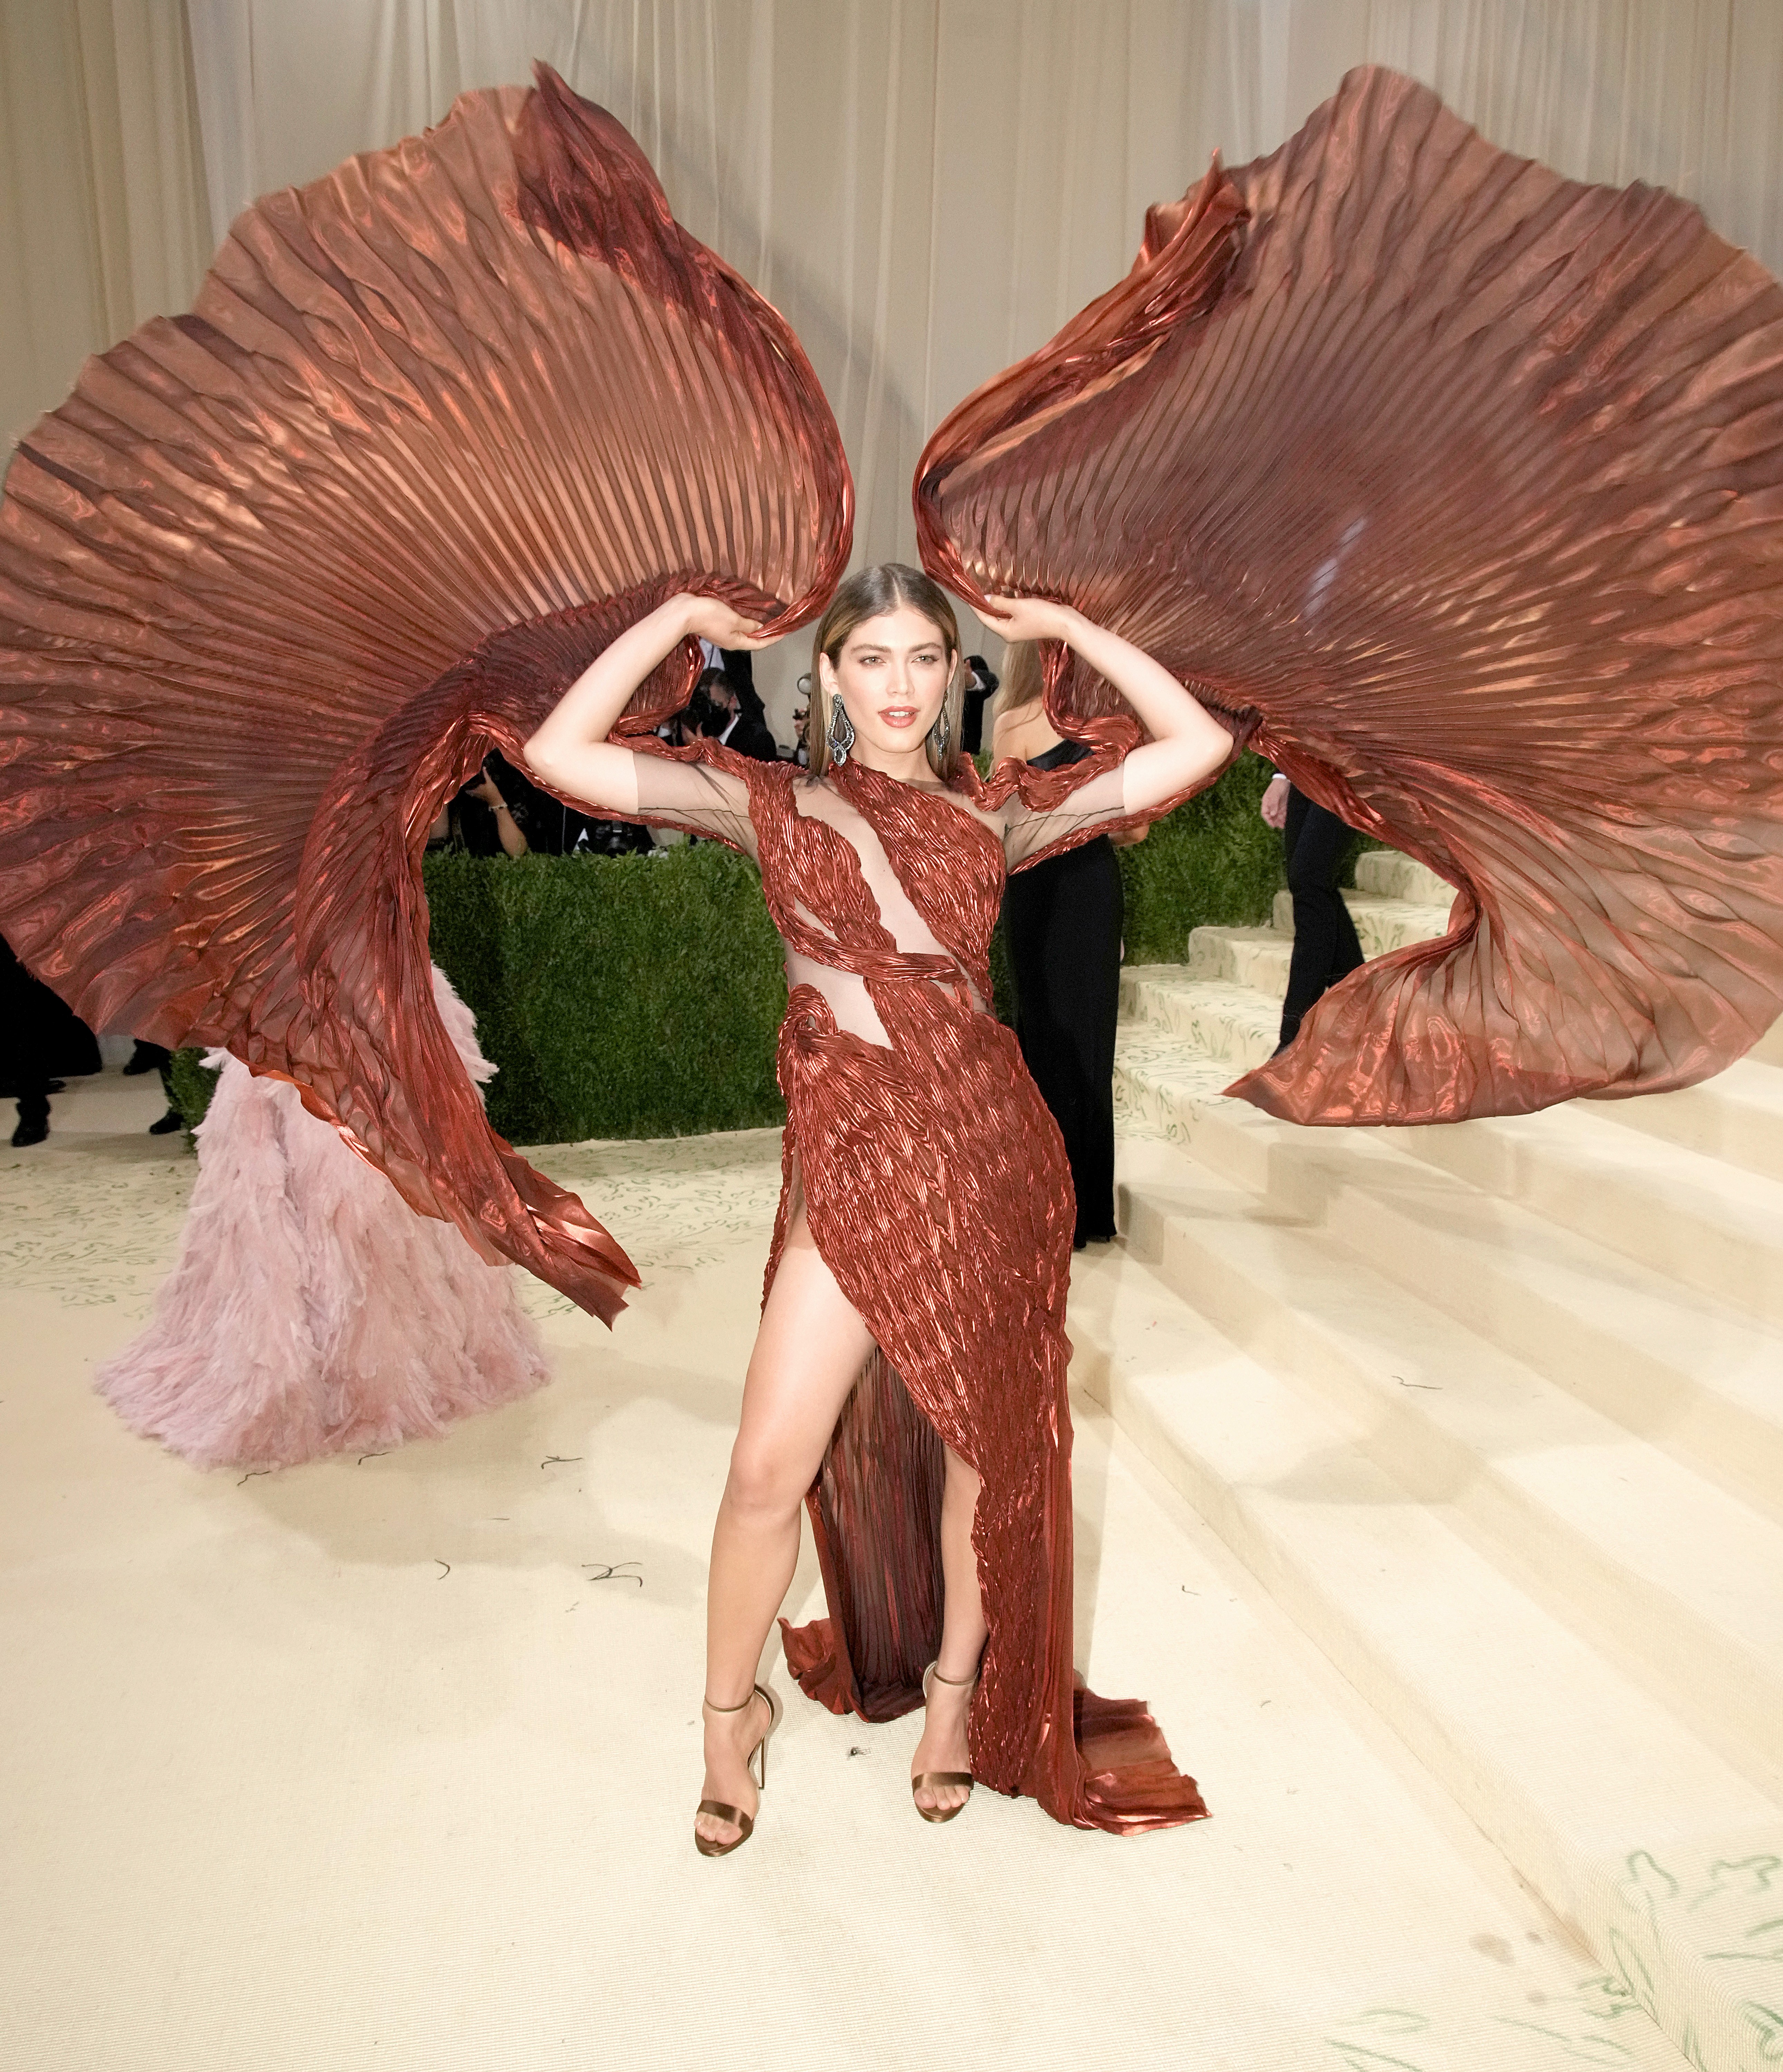 NEW YORK, NEW YORK - SEPTEMBER 13: Valentina Sampaio attends The 2021 Met Gala Celebrating In America: A Lexicon Of Fashion at Metropolitan Museum of Art on September 13, 2021 in New York City. (Photo by Jeff Kravitz/FilmMagic) (Foto: FilmMagic)